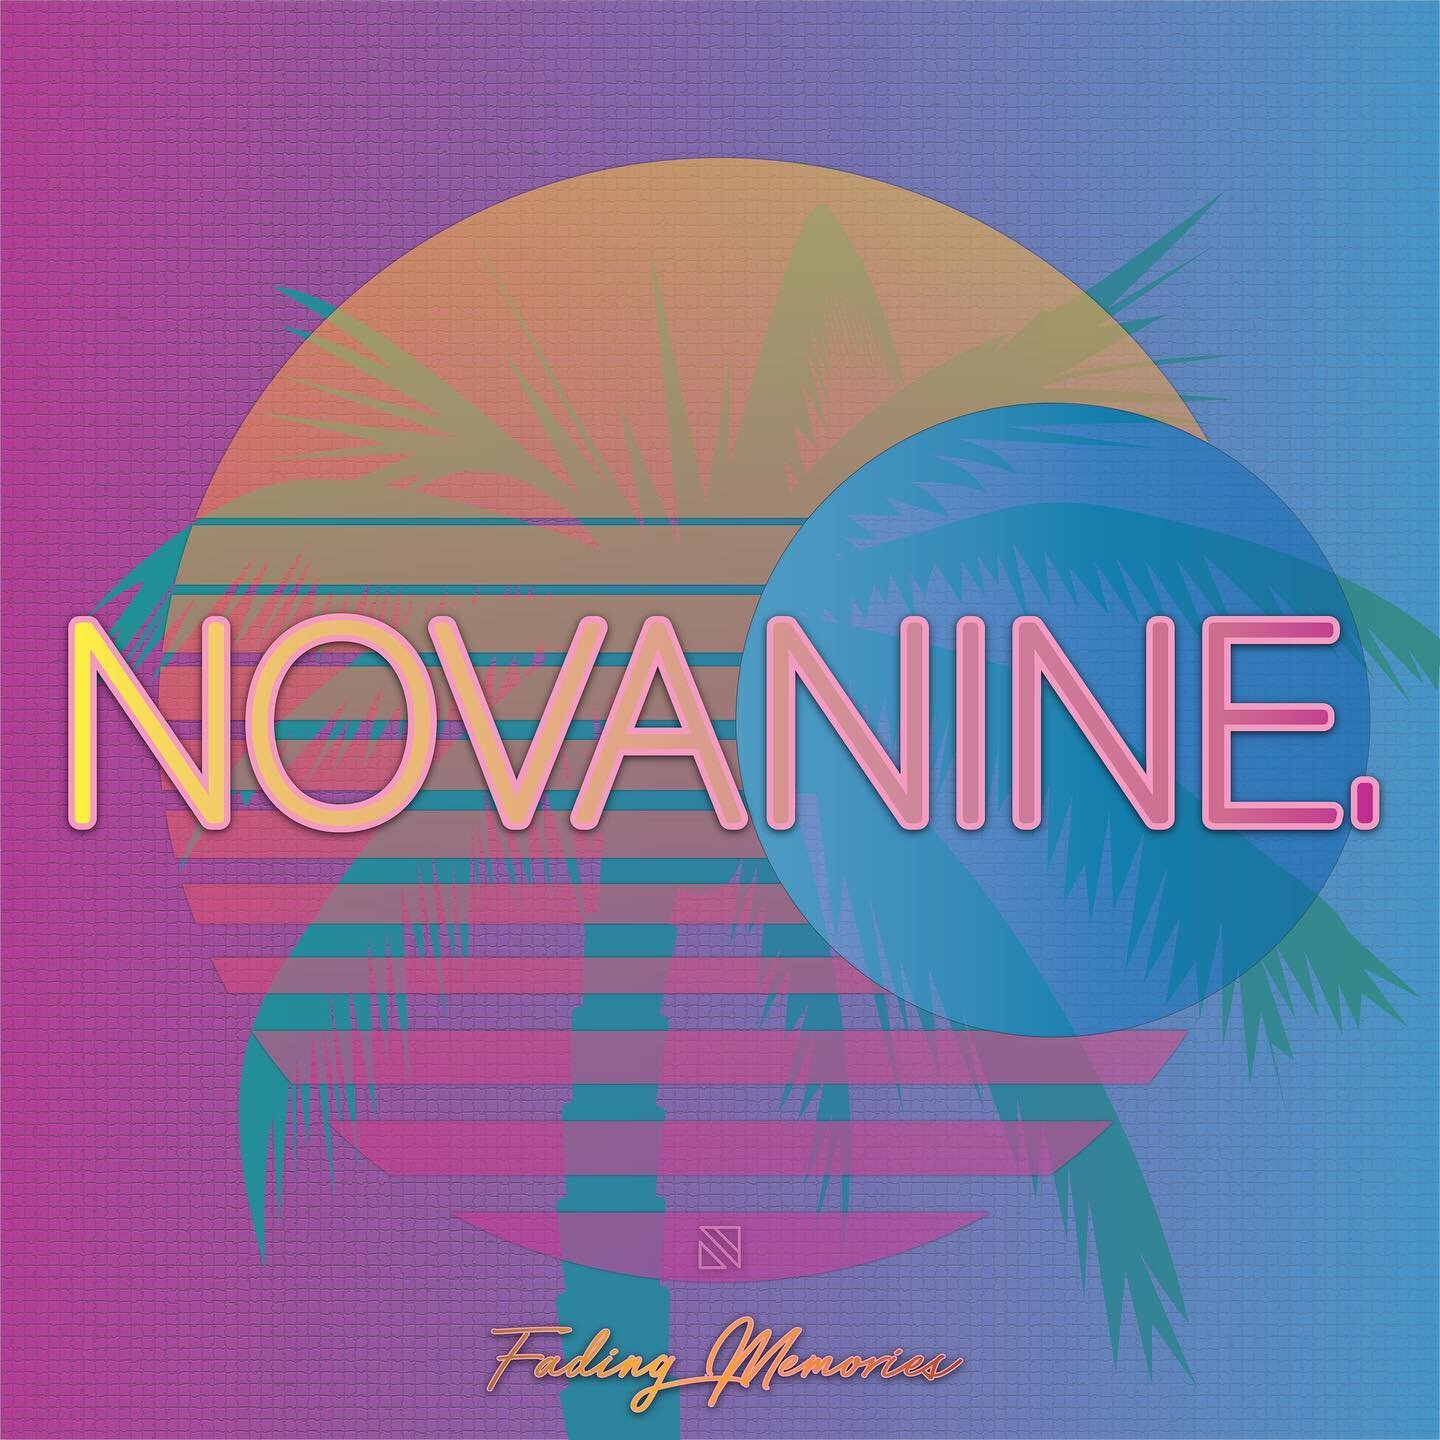 NovaNine is returning with a brand new track next Tuesday! Fading Memories is one of my favorites, blending retro synth sounds with cool guitar work, and even a wah pedal. 🎸🎹 #synthwave #retrowave #vaporwave #vaporwaveaesthetic #synthwaveart #guita